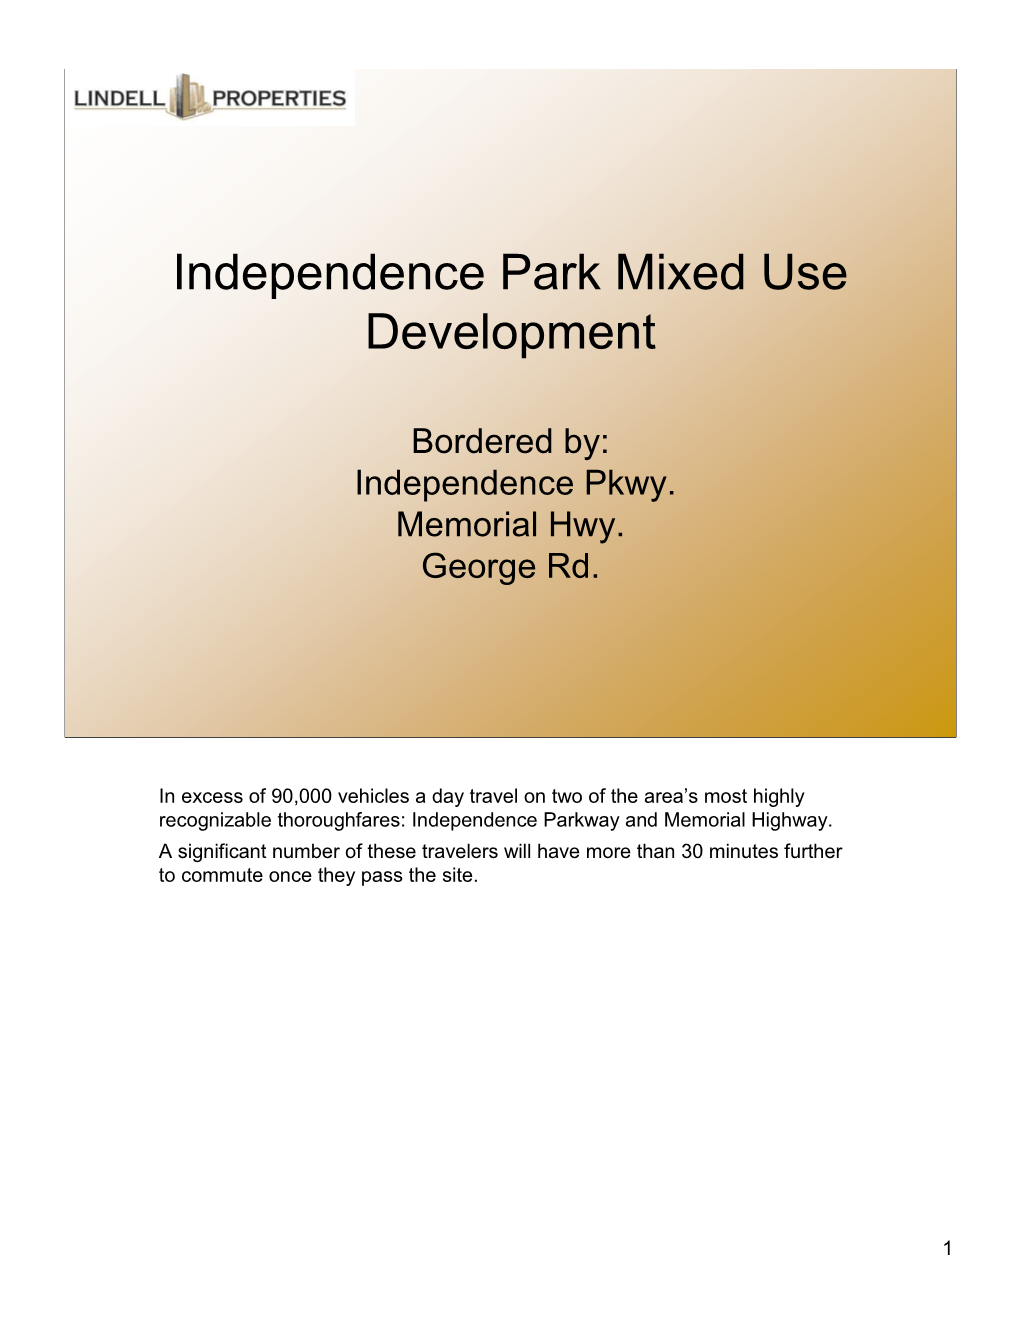 Independence Park Mixed Use Development